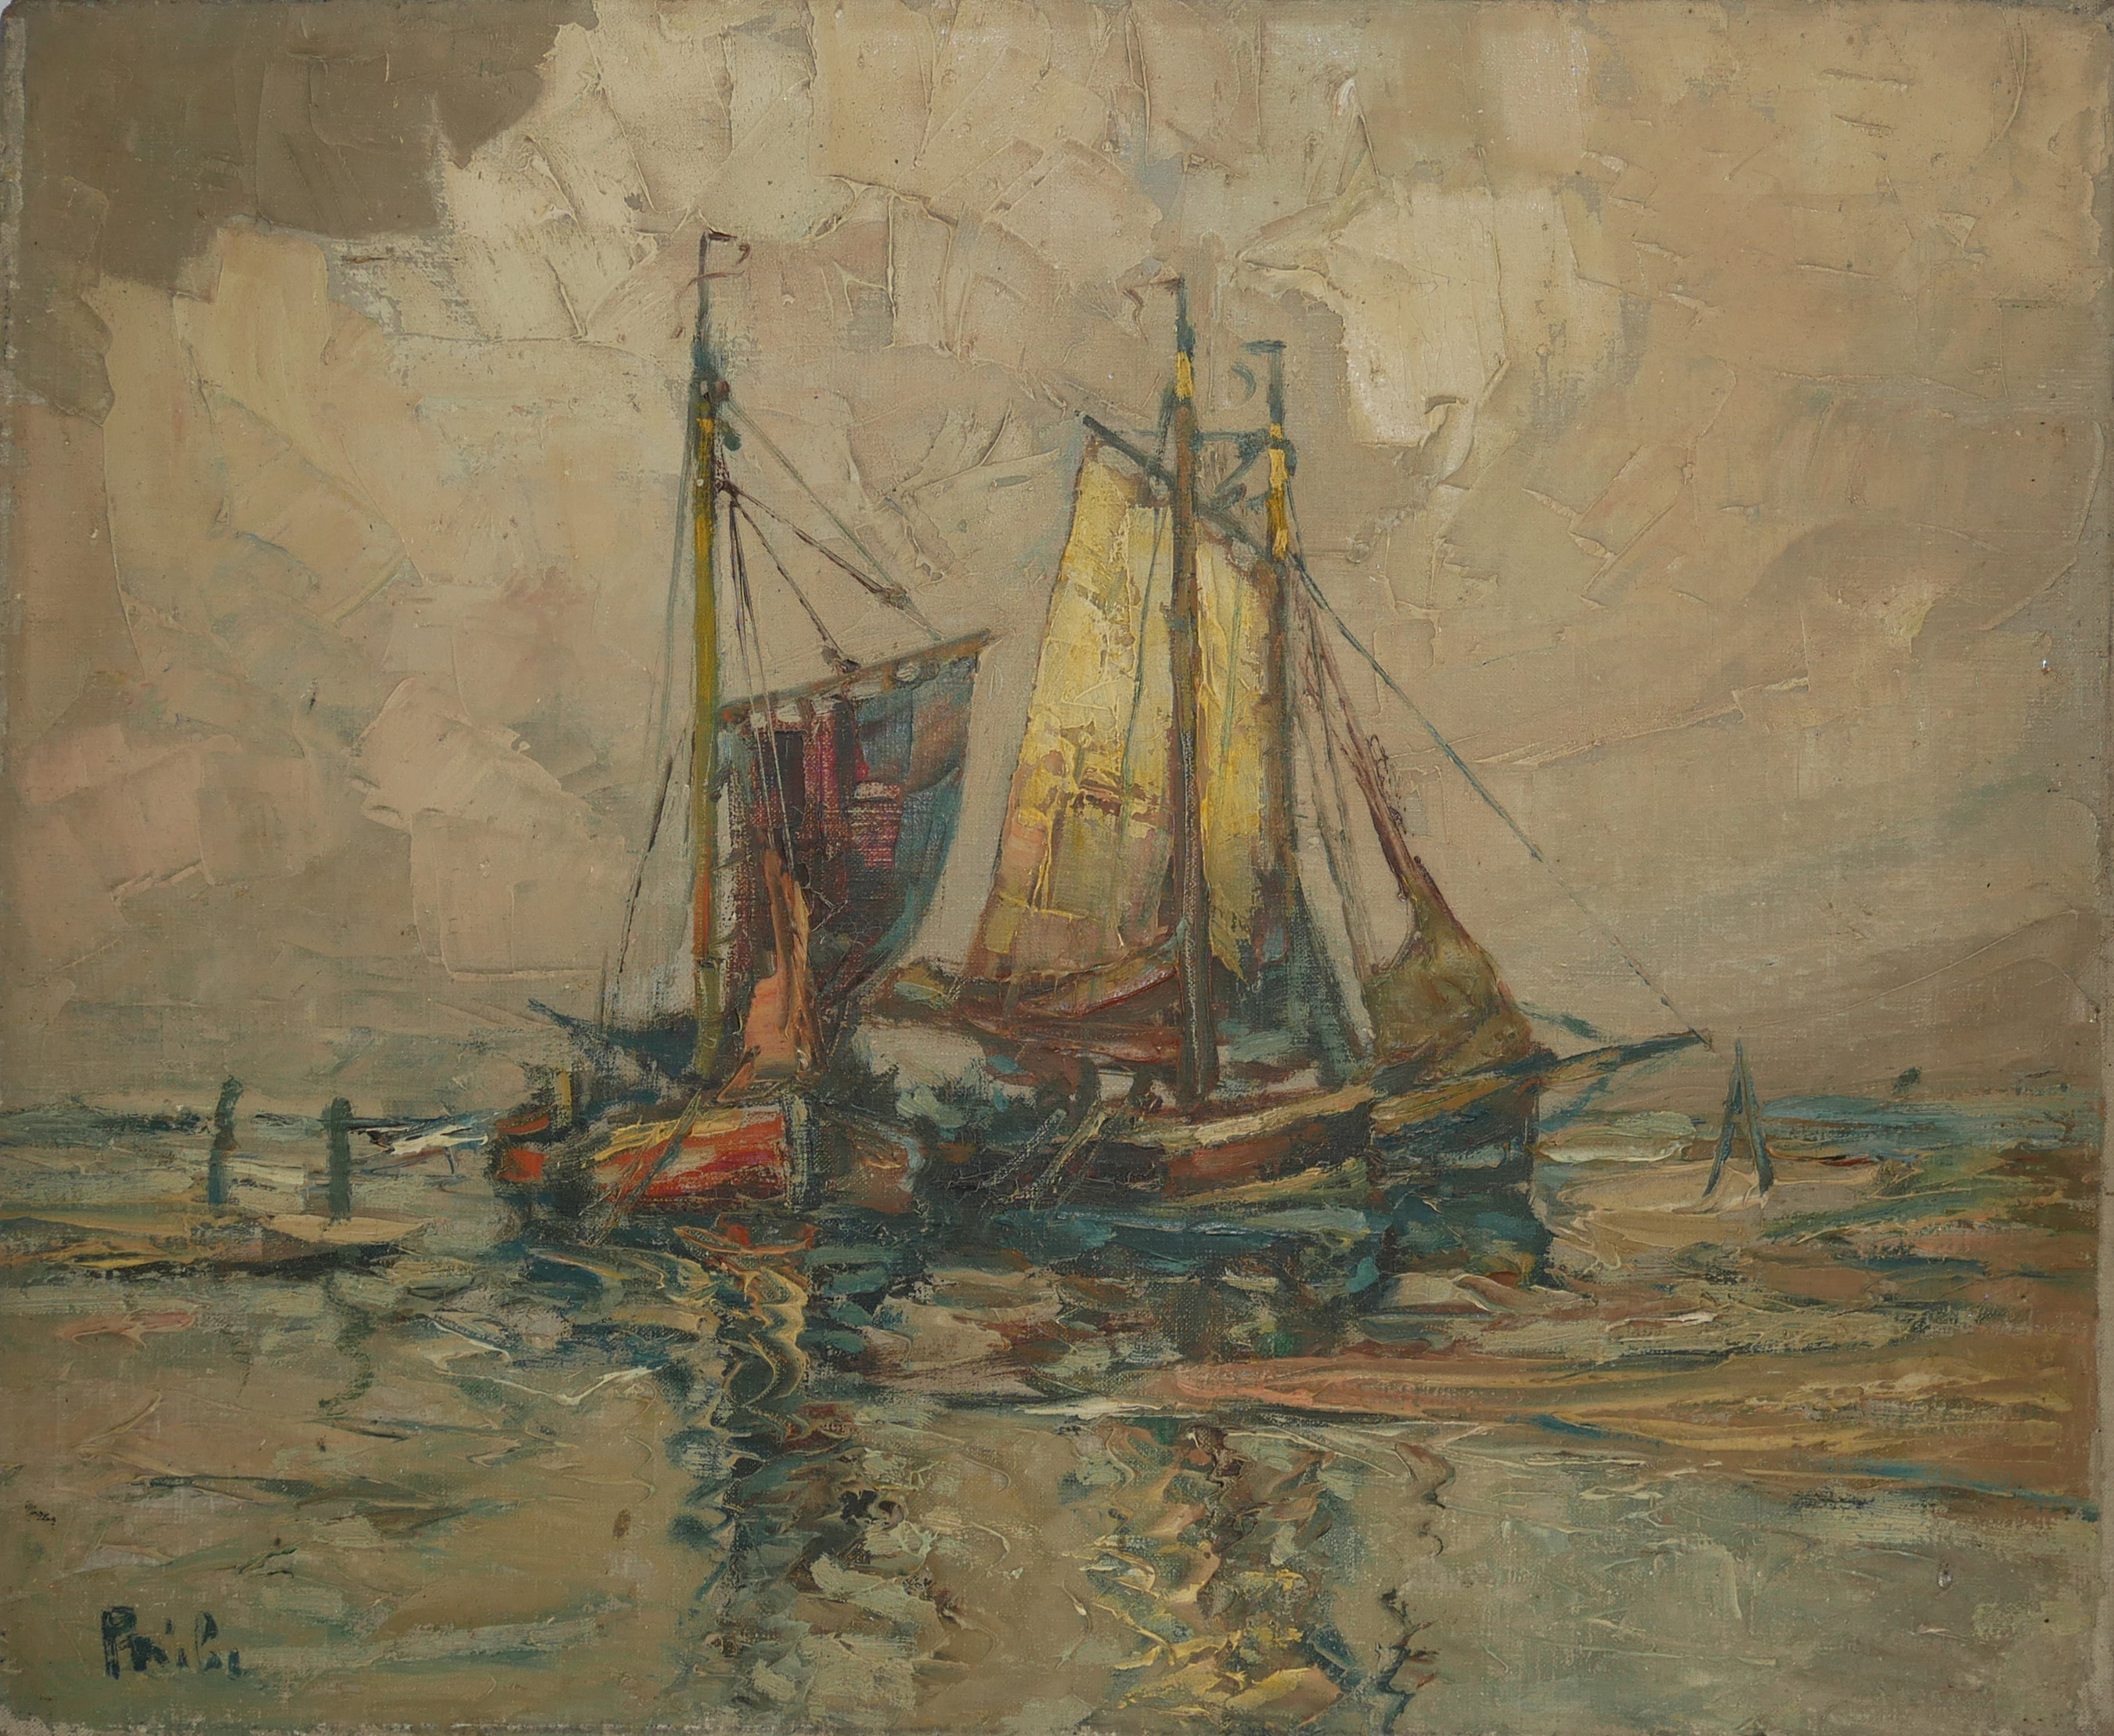 AN EARLY 20TH CENTURY OIL ON CANVAS, MARINE SCENE, FISHING BOATS AT SEA Signed lower left. (approx